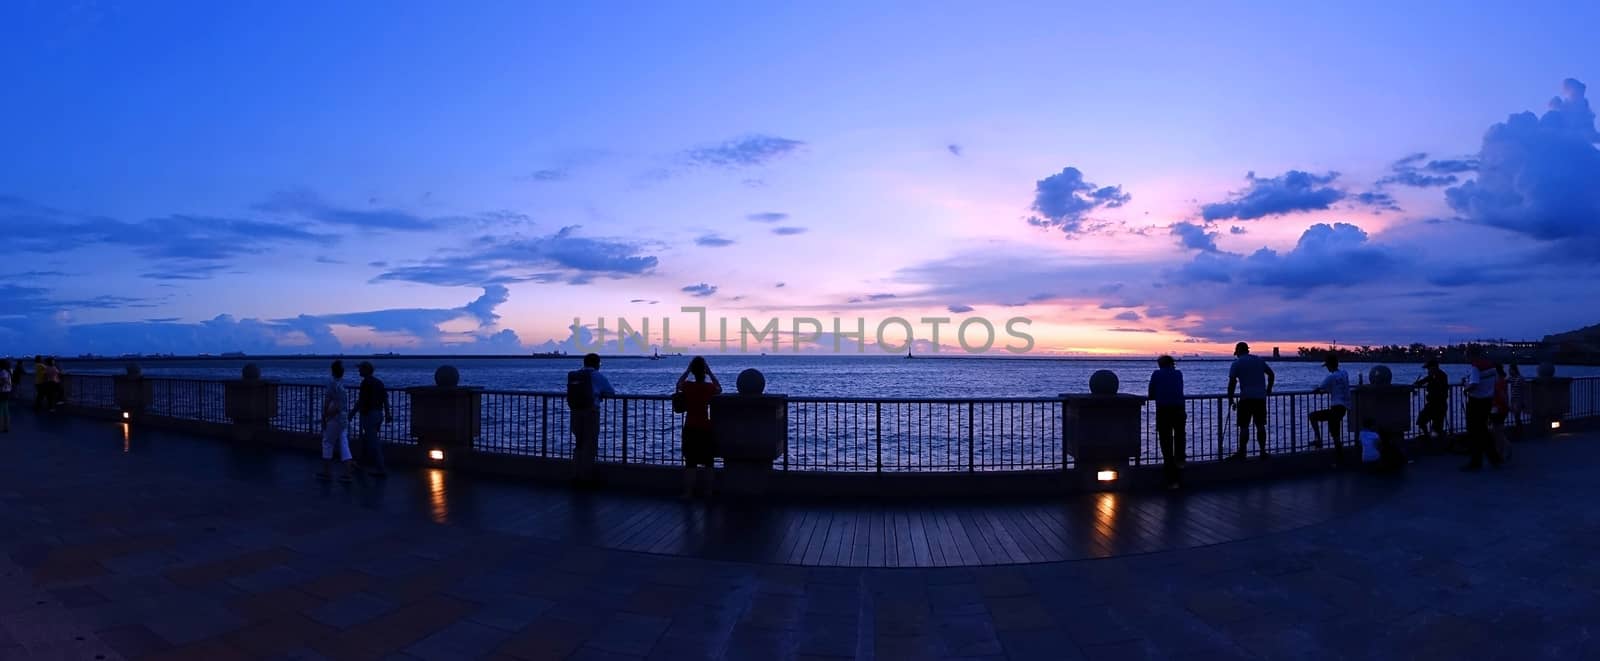 KAOHSIUNG, TAIWAN -- JULY 4, 2016: People enjoy the beautiful evening sky after sunset at a beach outside Kaohsiung Harbor.